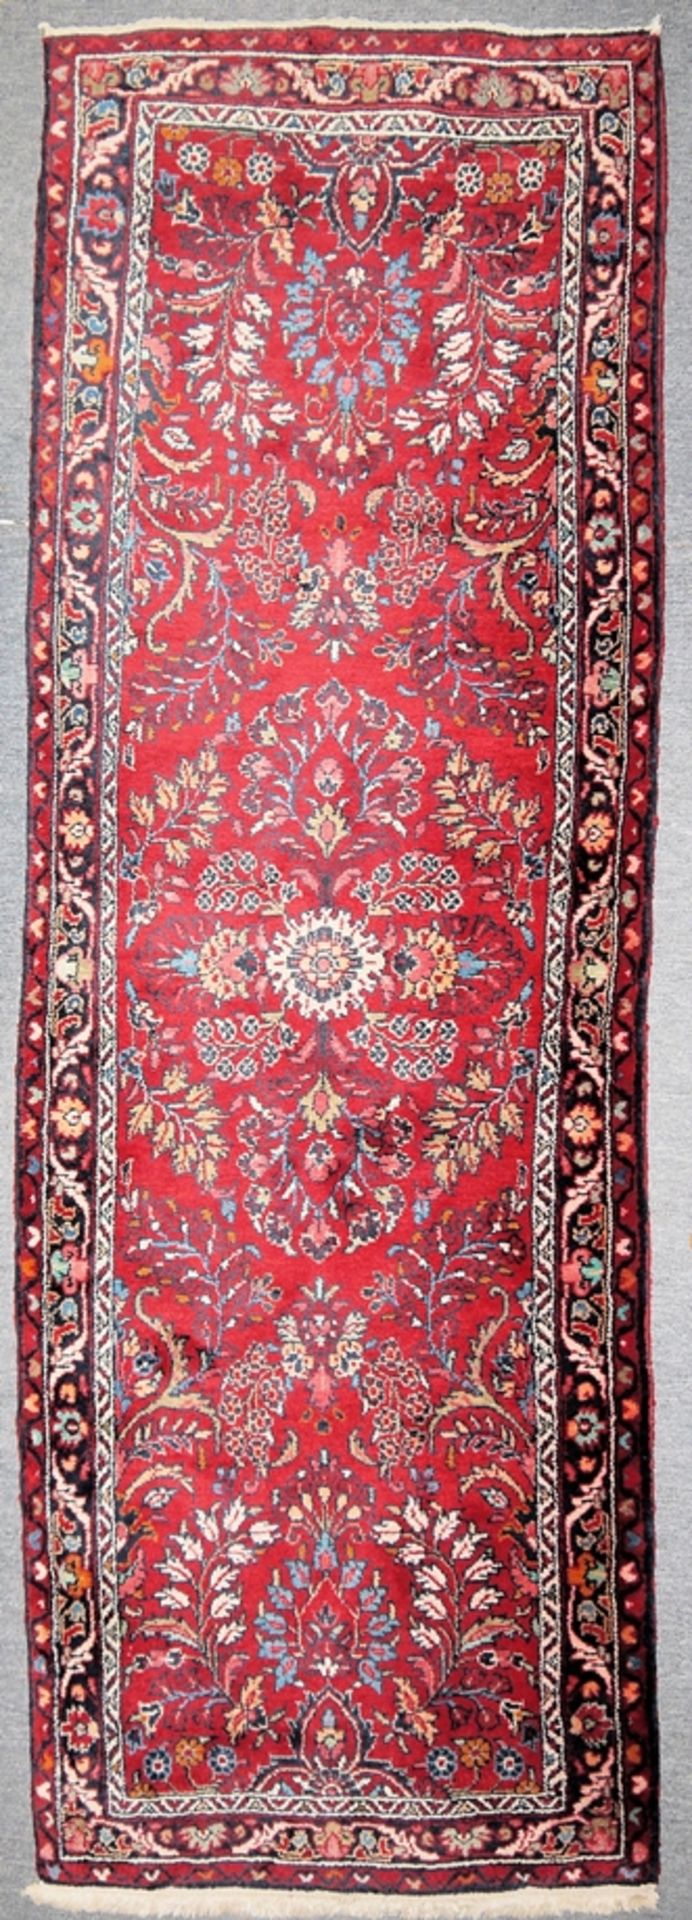 Oriental carpet and runner, Persia, approx. 50 years old - Image 2 of 2